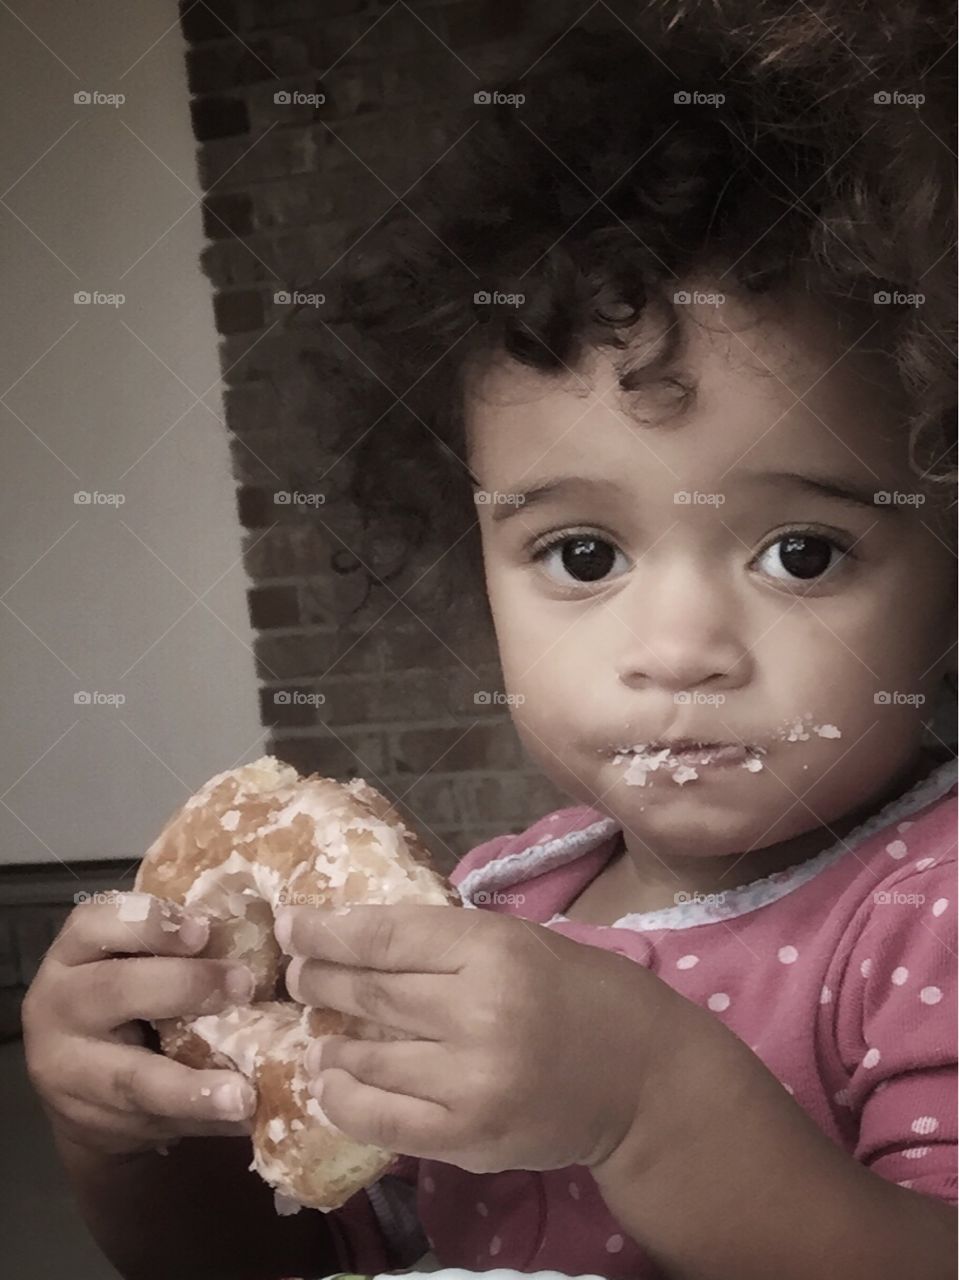 Babies first ever donut 